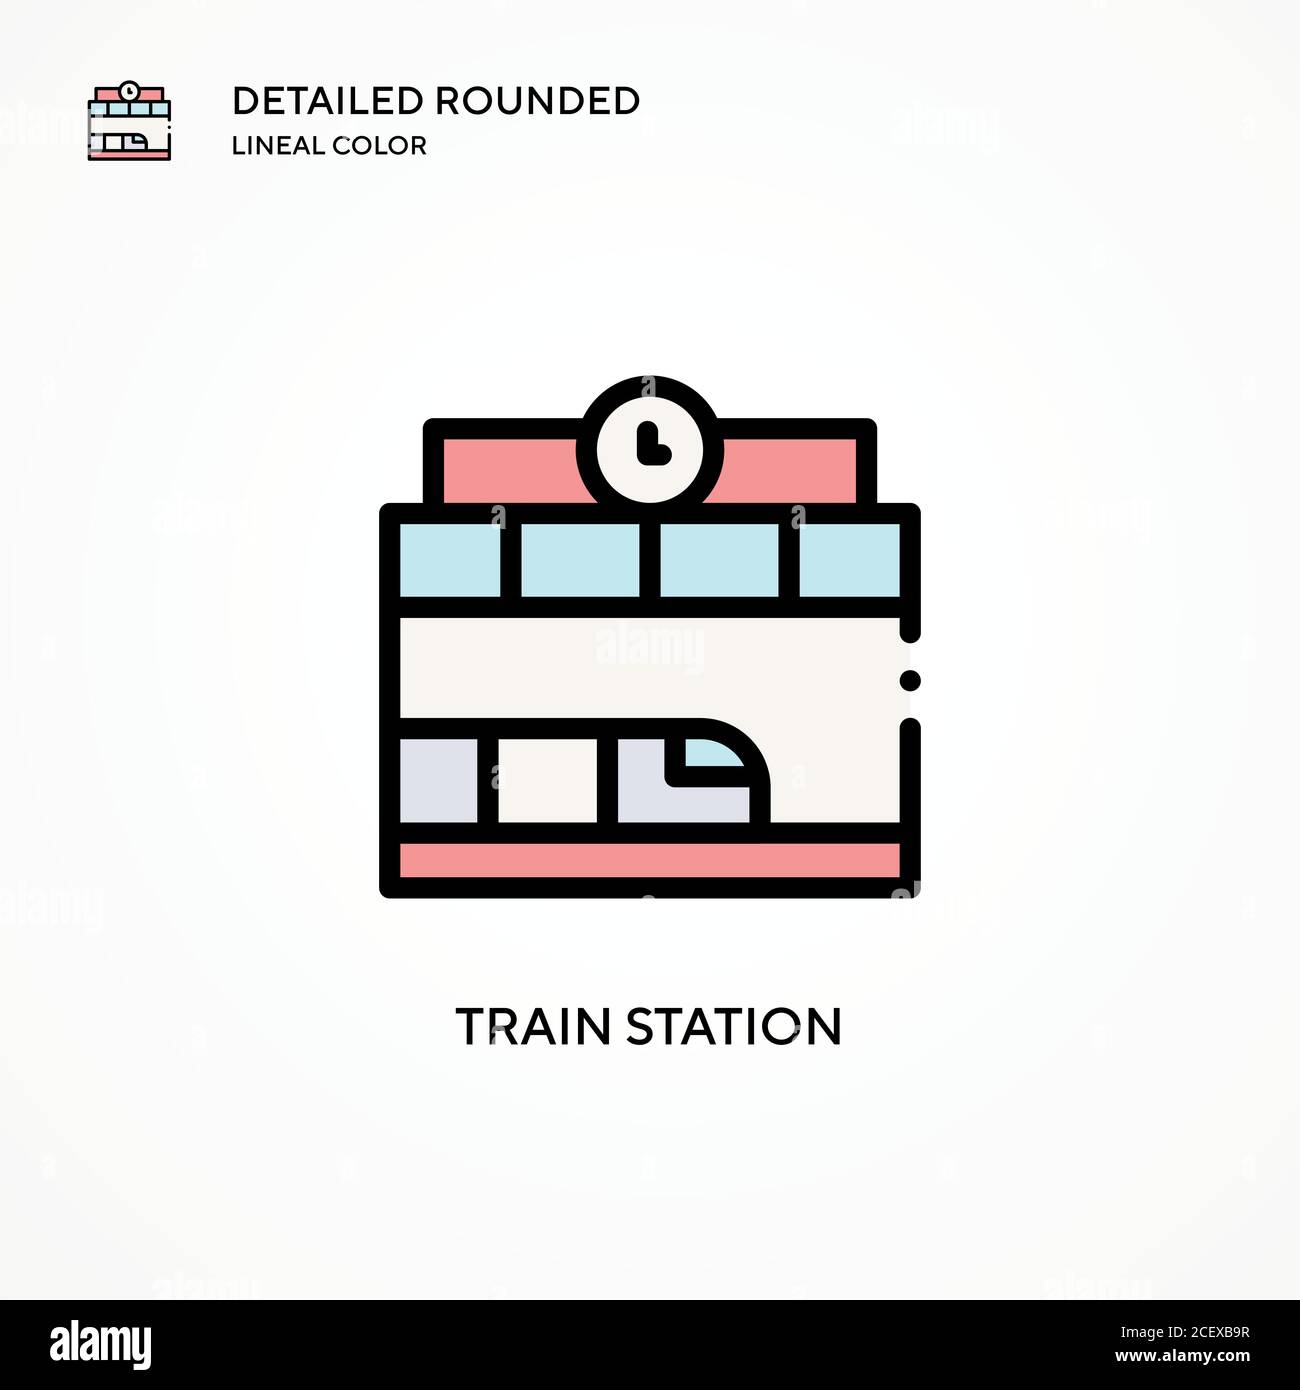 Train station vector icon. Modern vector illustration concepts. Easy to edit and customize. Stock Vector